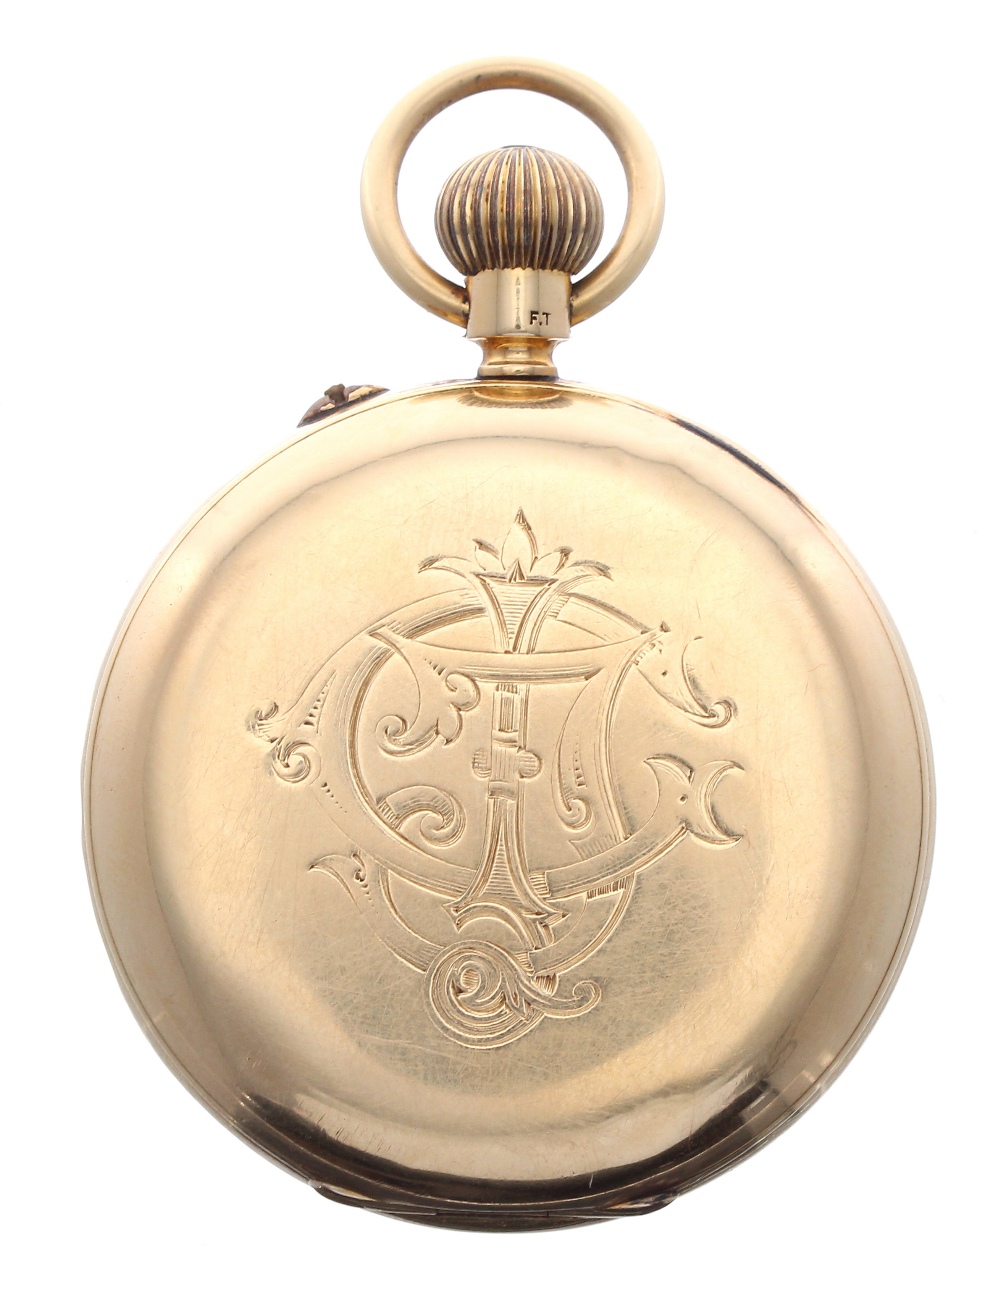 Goldsmiths & Silversmiths Company 18ct lever pocket watch, London 1908, signed three quarter plate - Image 2 of 3